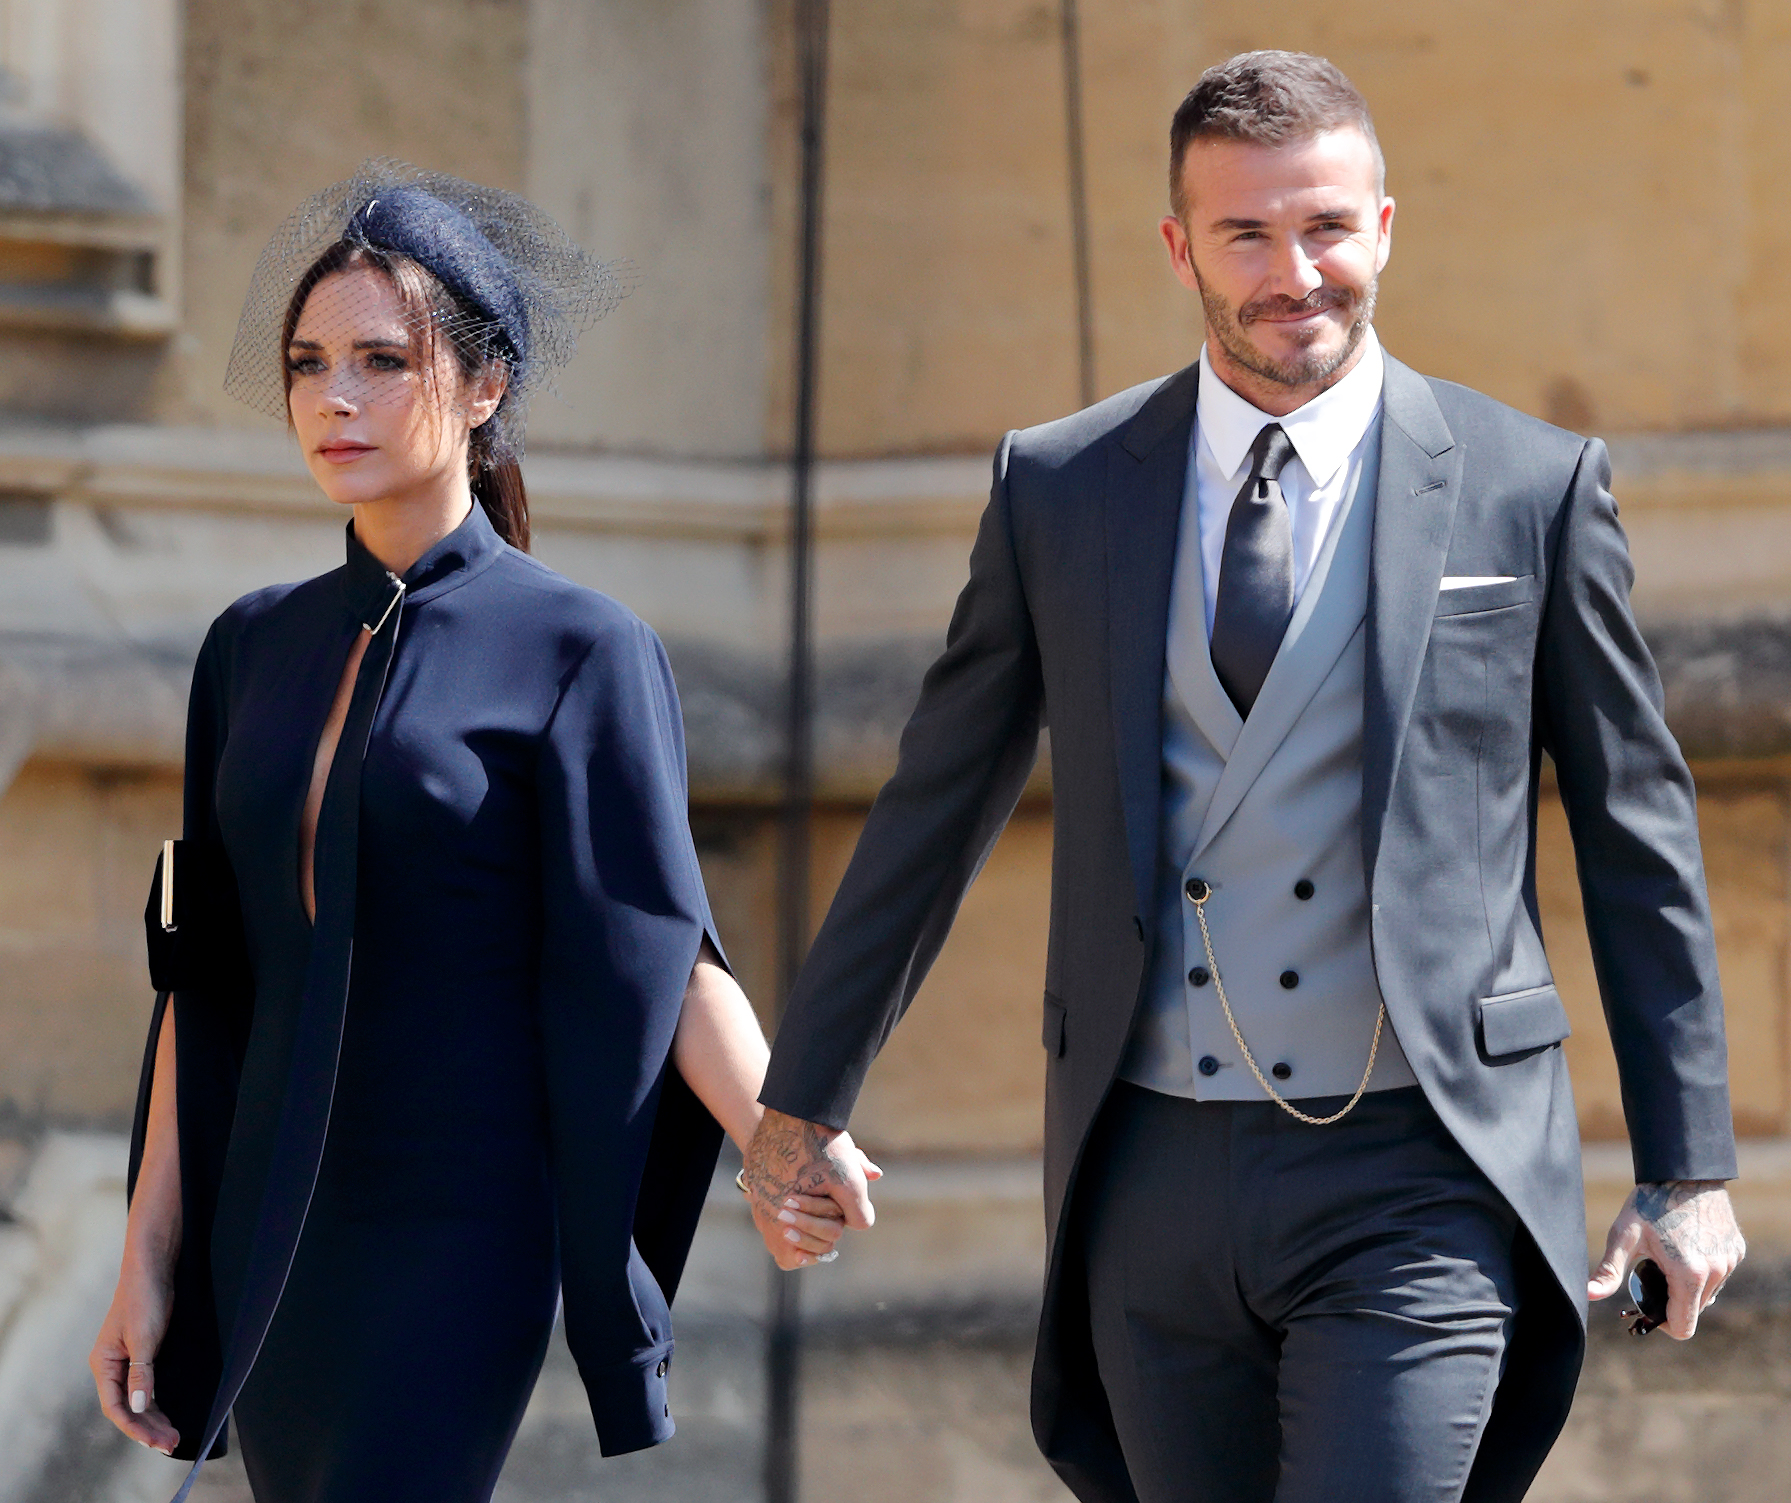 Victoria Beckham and David Beckham in Windsor, England, on May 19, 2018| Source: Getty Images